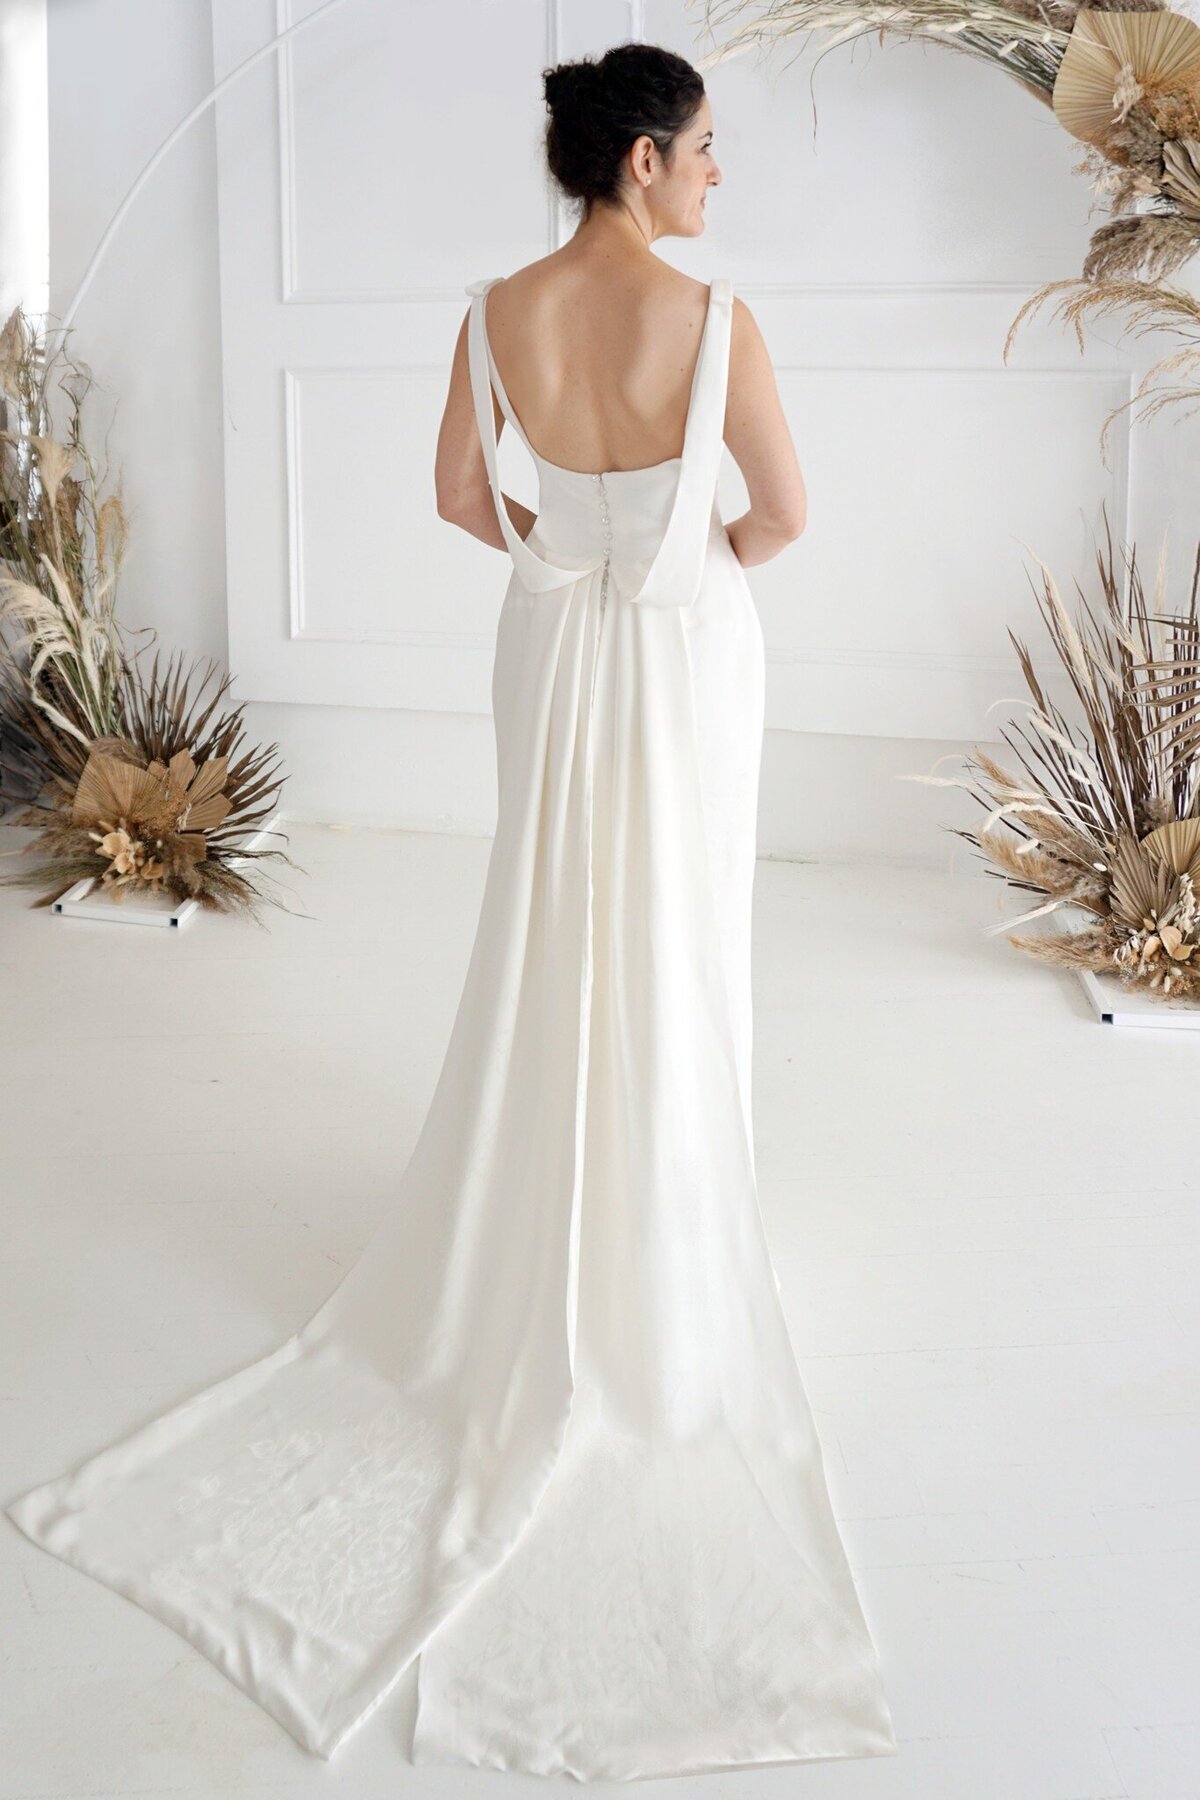 The back view of the Jealine wedding dress style features a draped back and a pair of detachable trains.